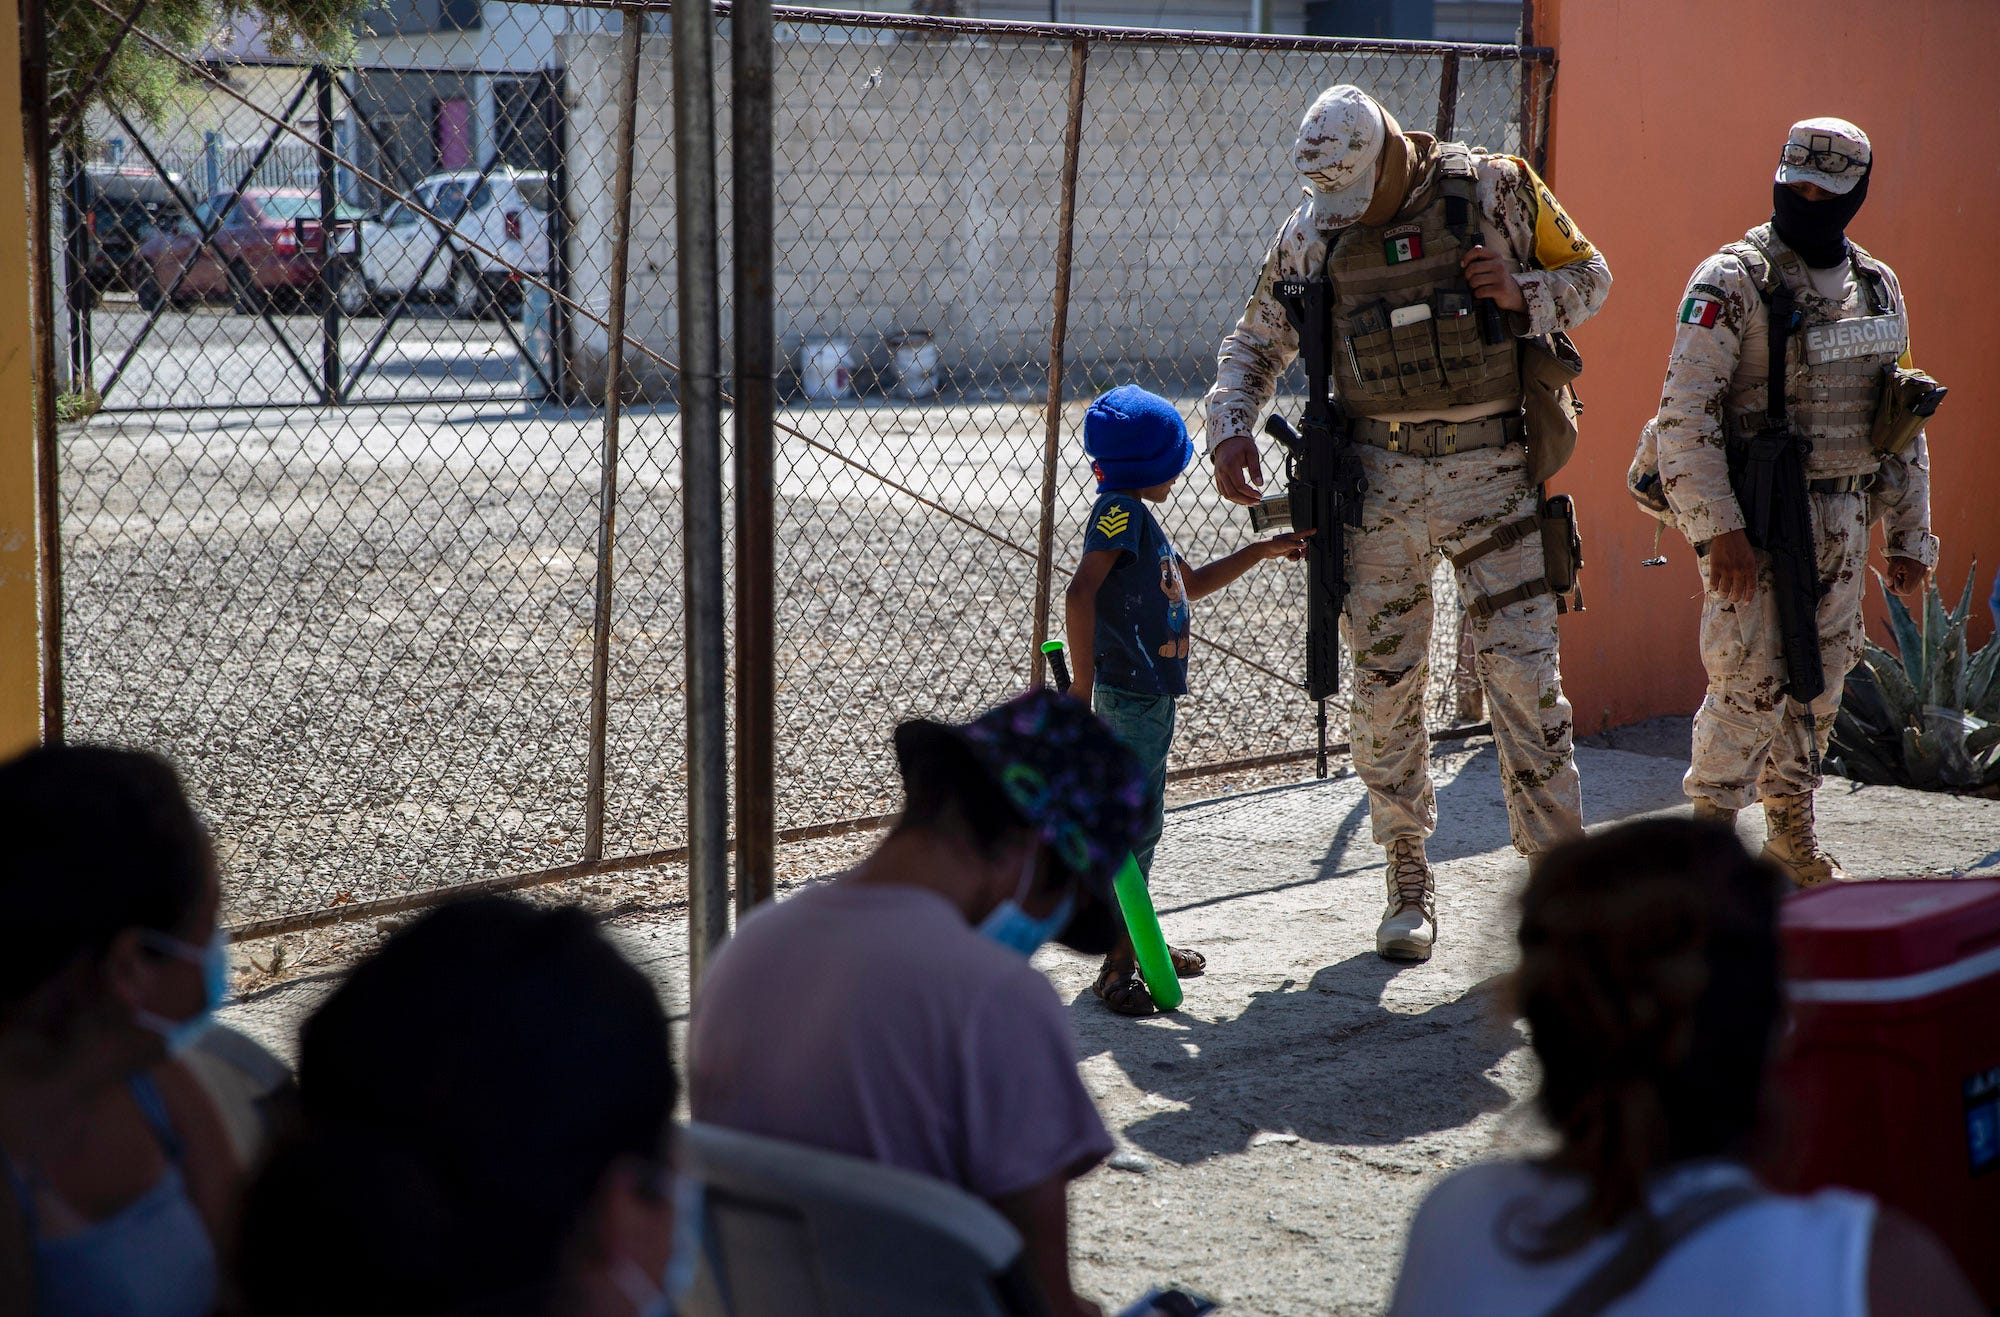 Mexico migrant child looks at soldier gun